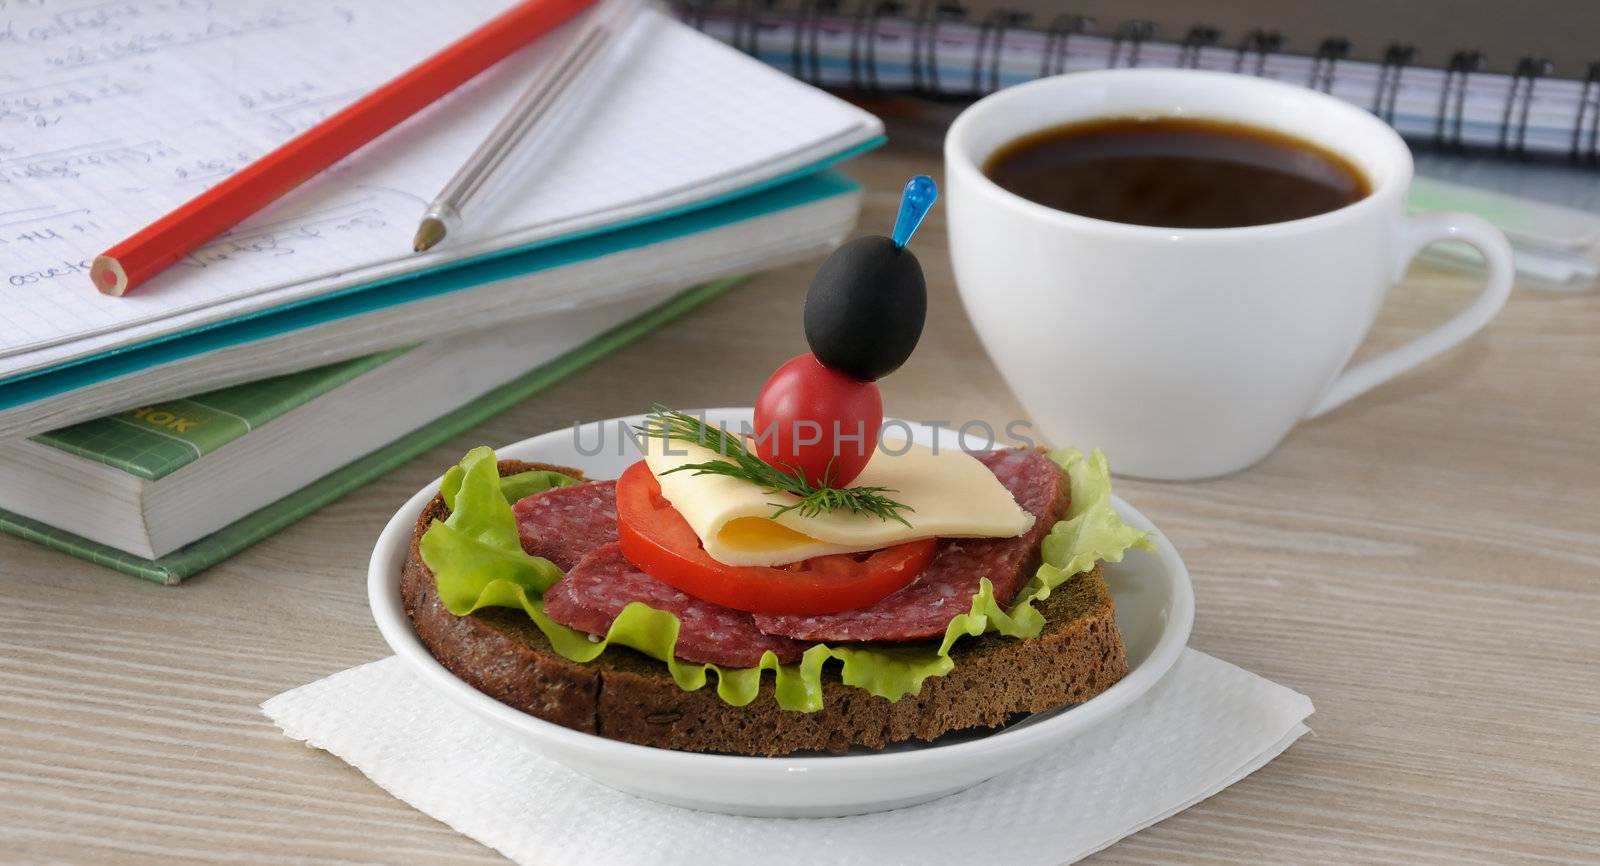 Salami sandwich and a cup of coffee in the background notes and notebooks